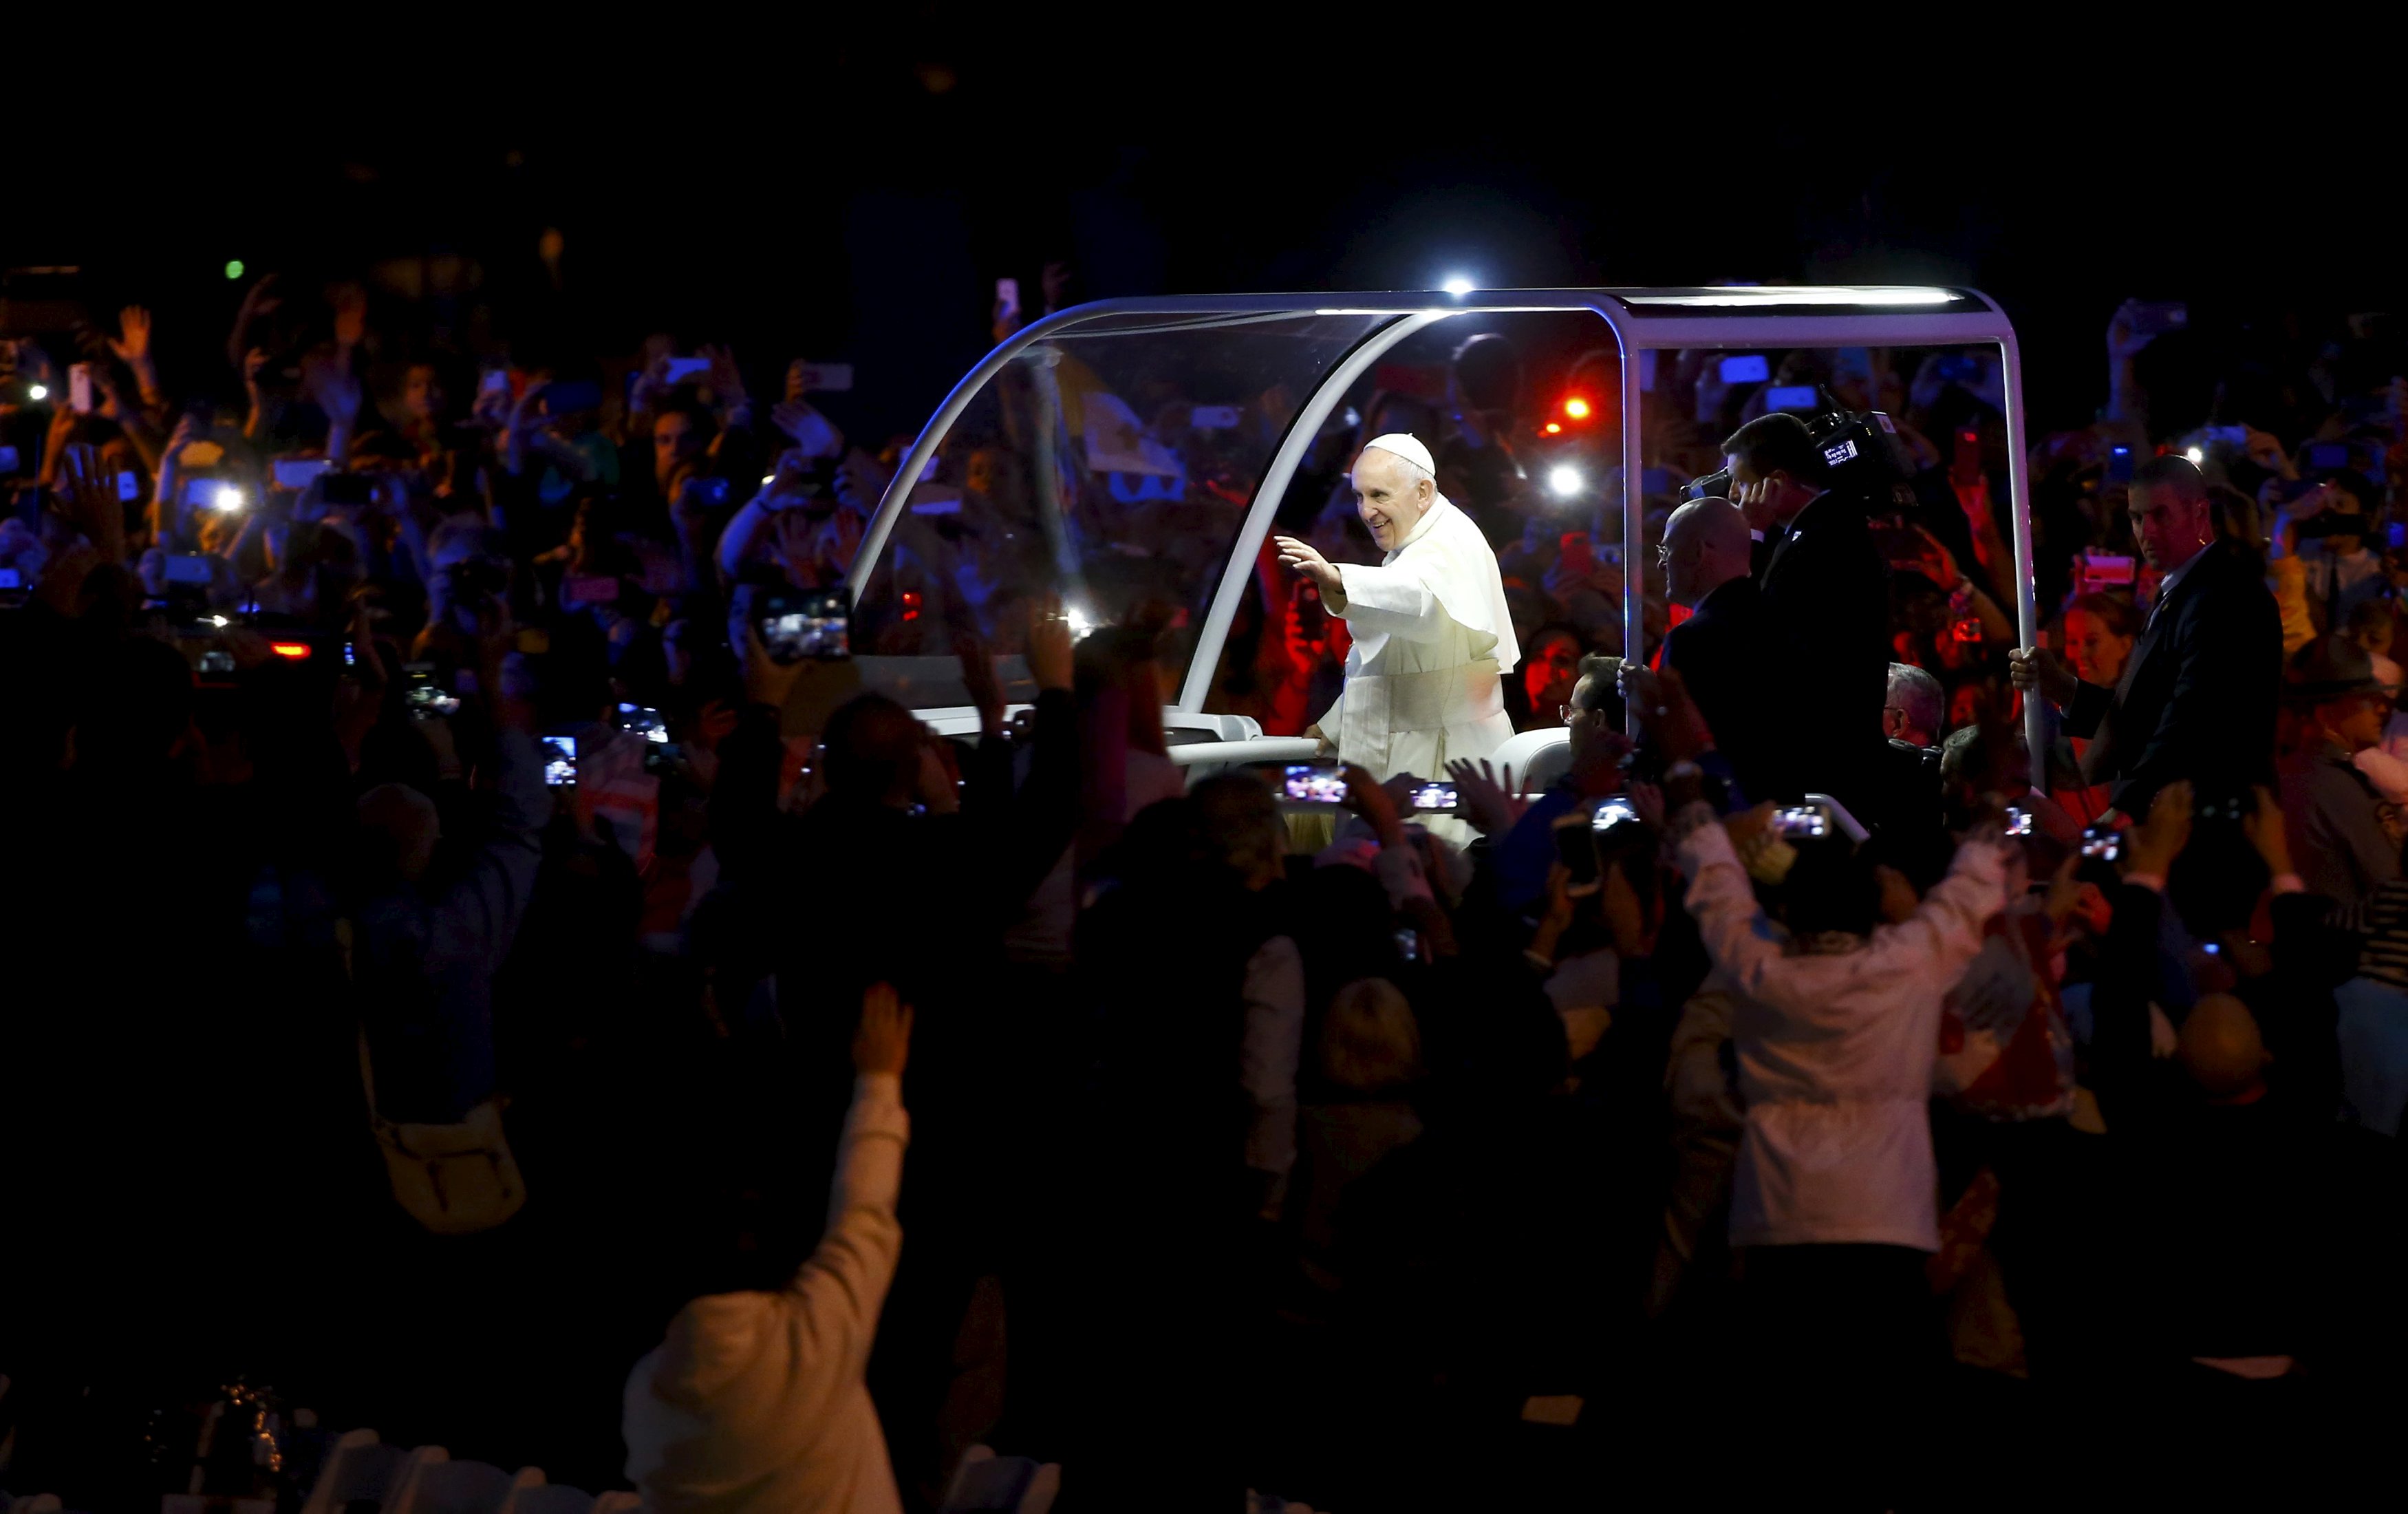 Pope Francis arrives at the Festival of Families rally along Benjamin Franklin Parkway in Philadelphia, Pennsylvania September 26, 2015.